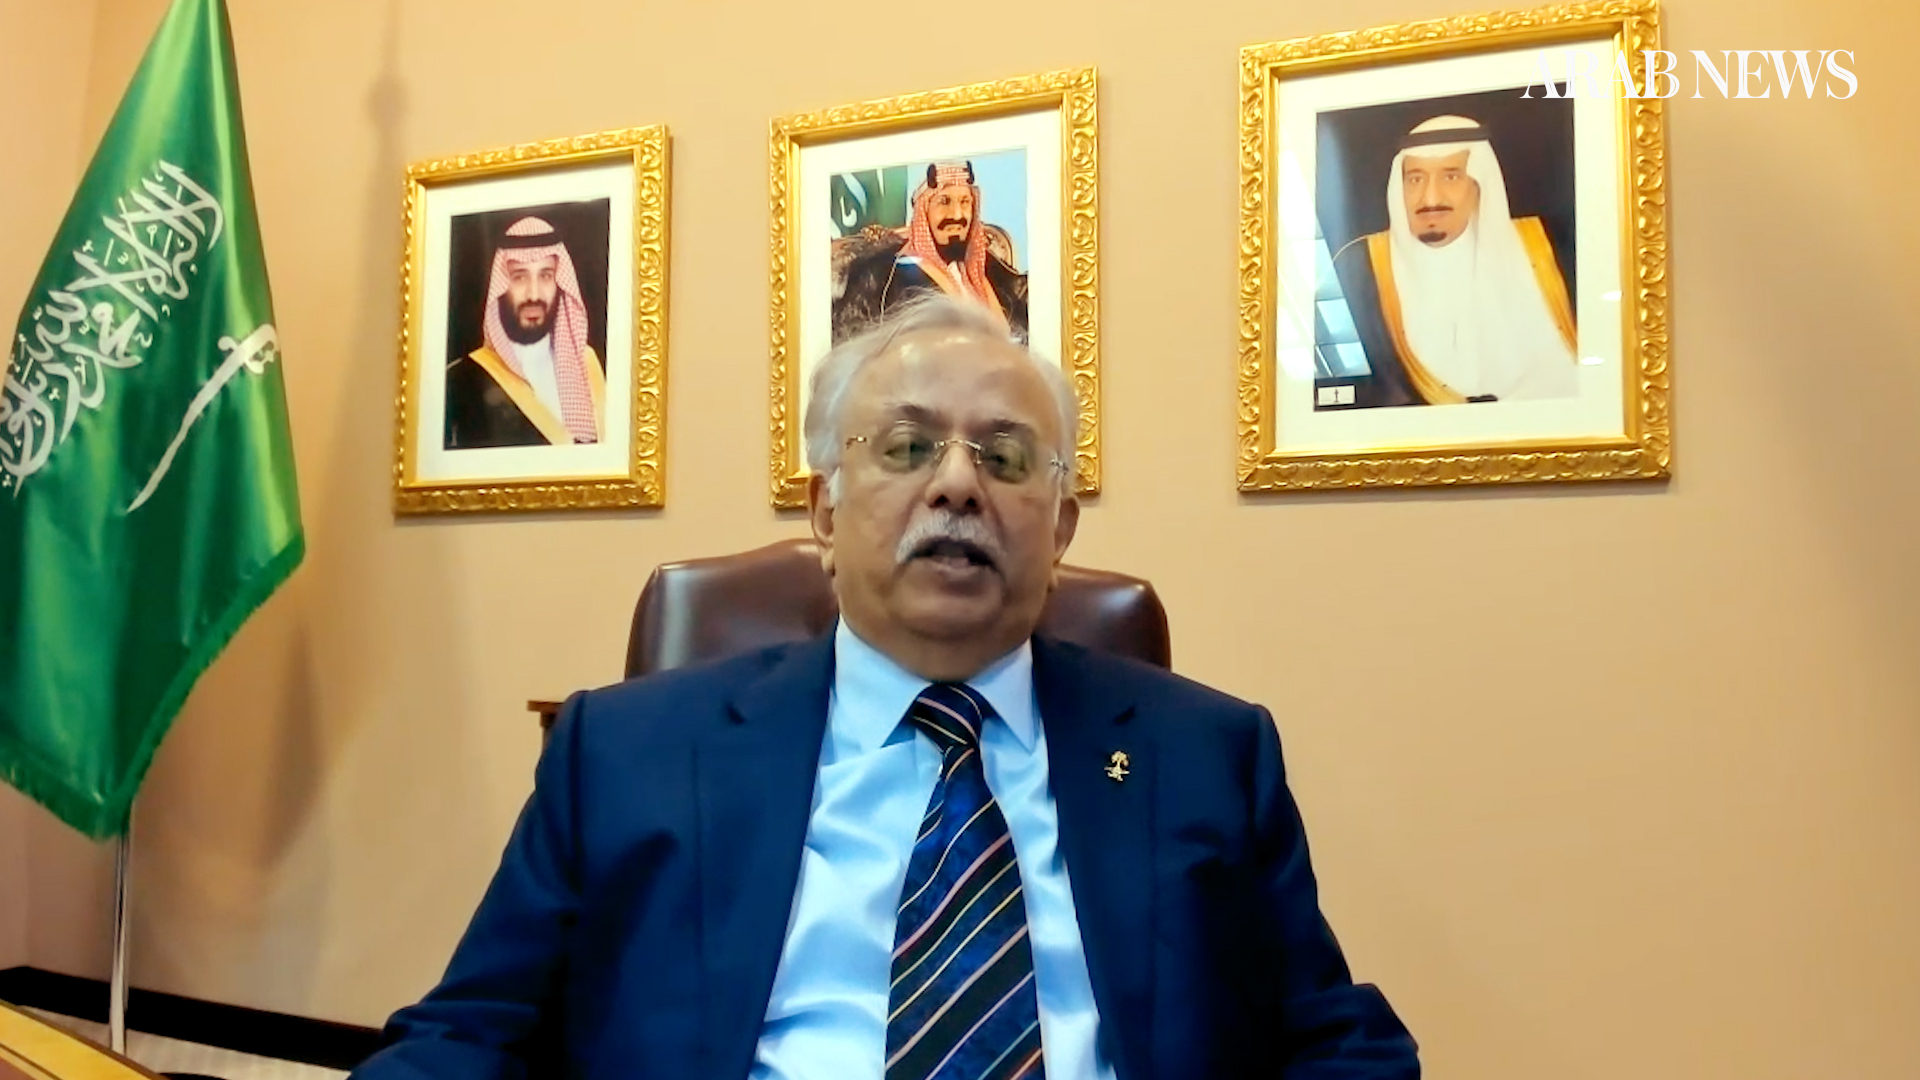 Frankly Speaking: “Not convinced there’s a good argument” for taking Houthis off terror list, says Saudi diplomat Abdallah Al-Moualimi